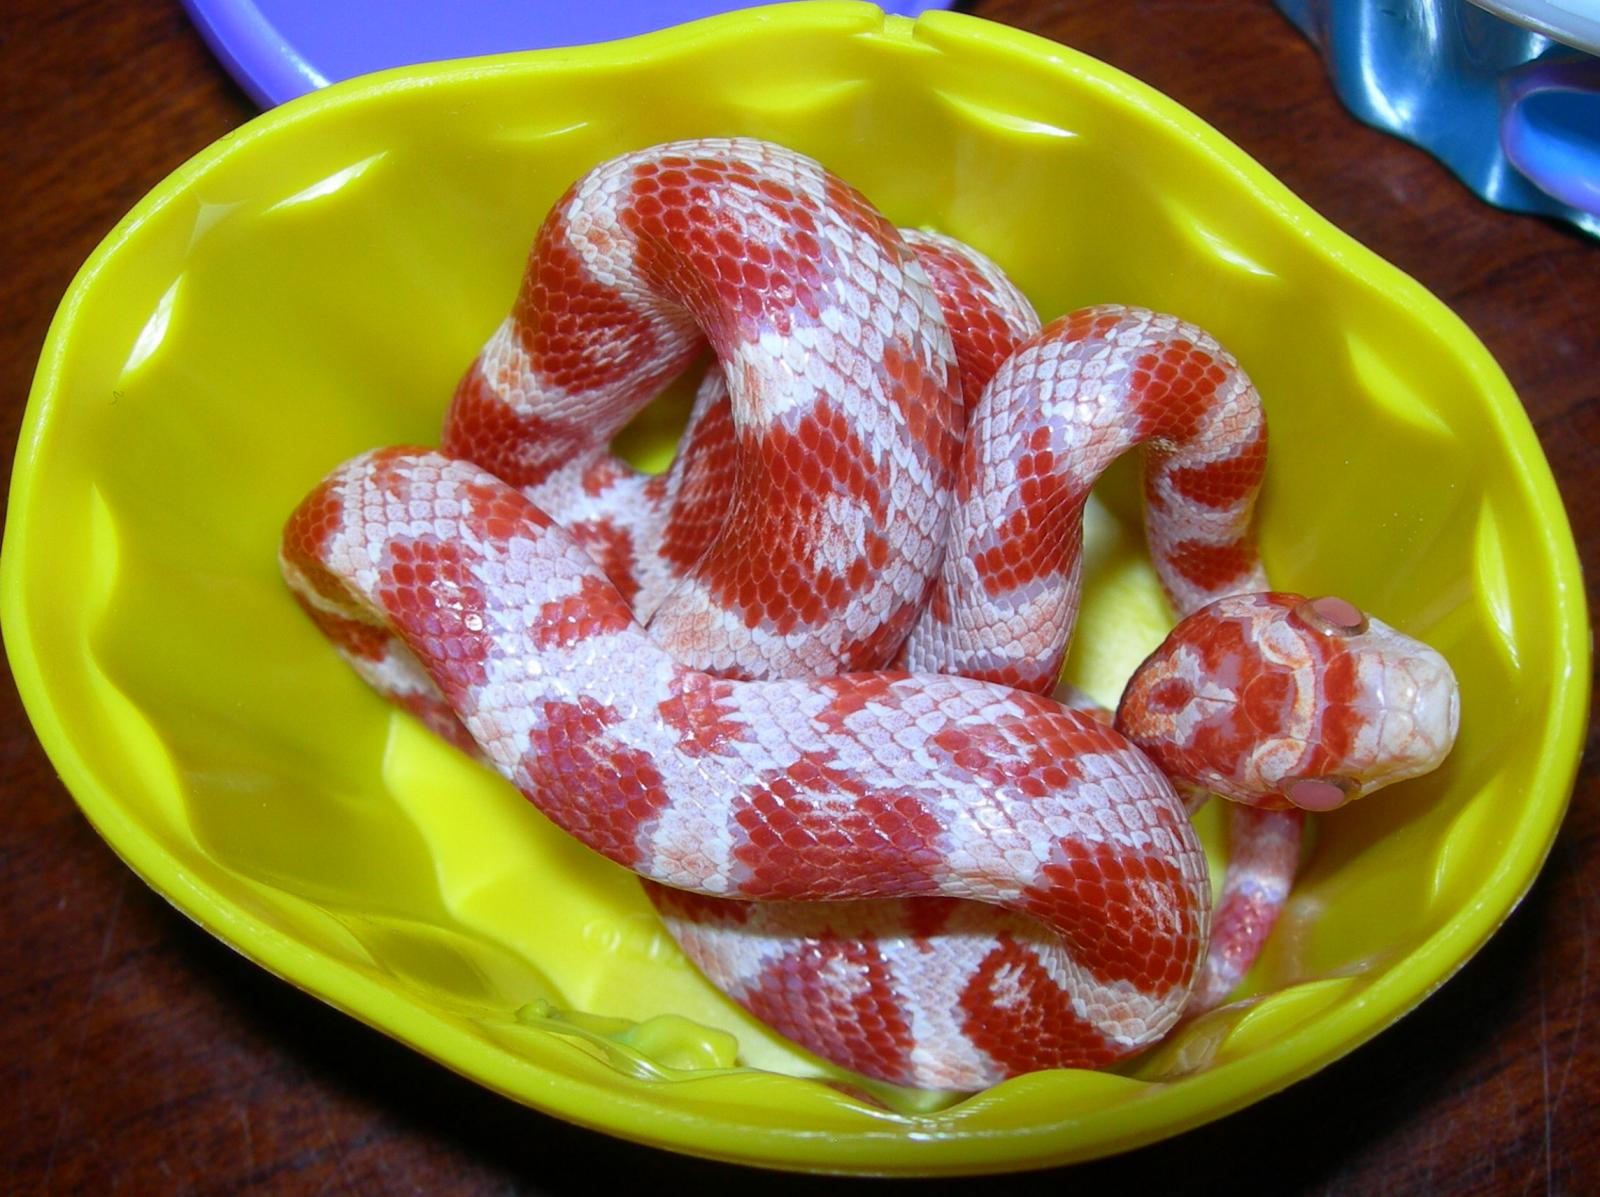 Snakes In Cupcakes!